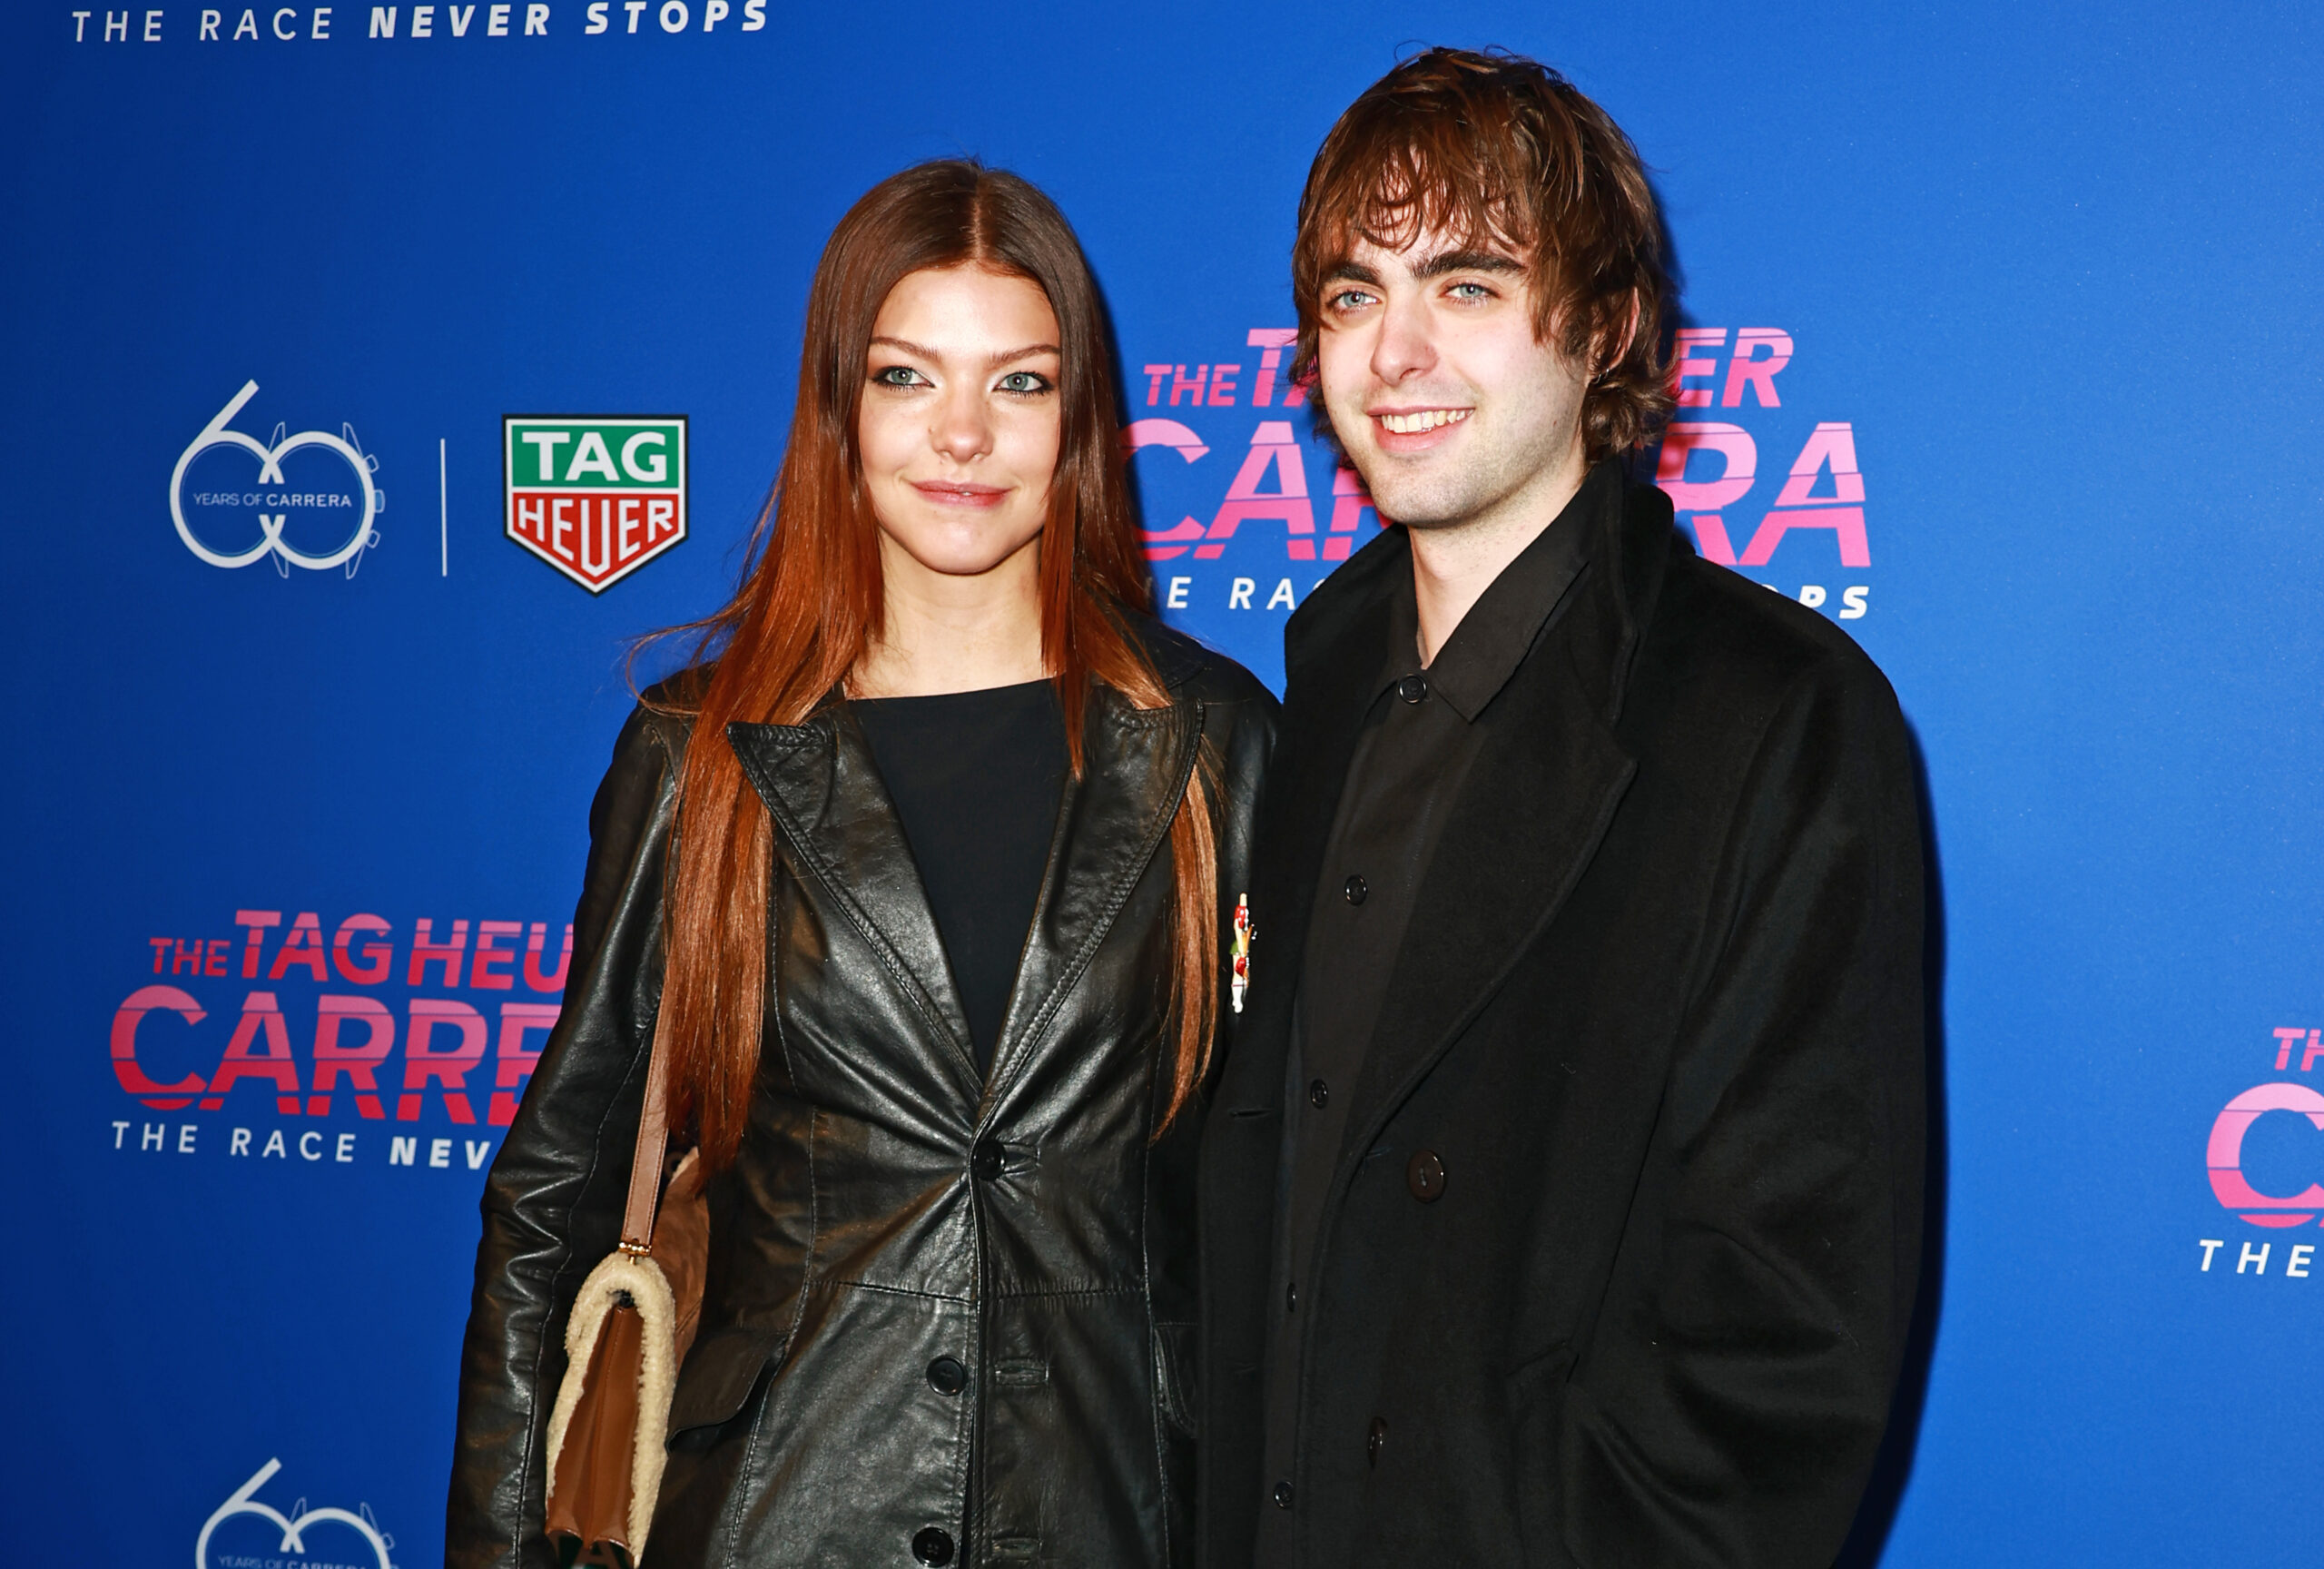 Isobel richmond and lennon gallagher at the tag heuer carrera 60th anniversary048 scaled